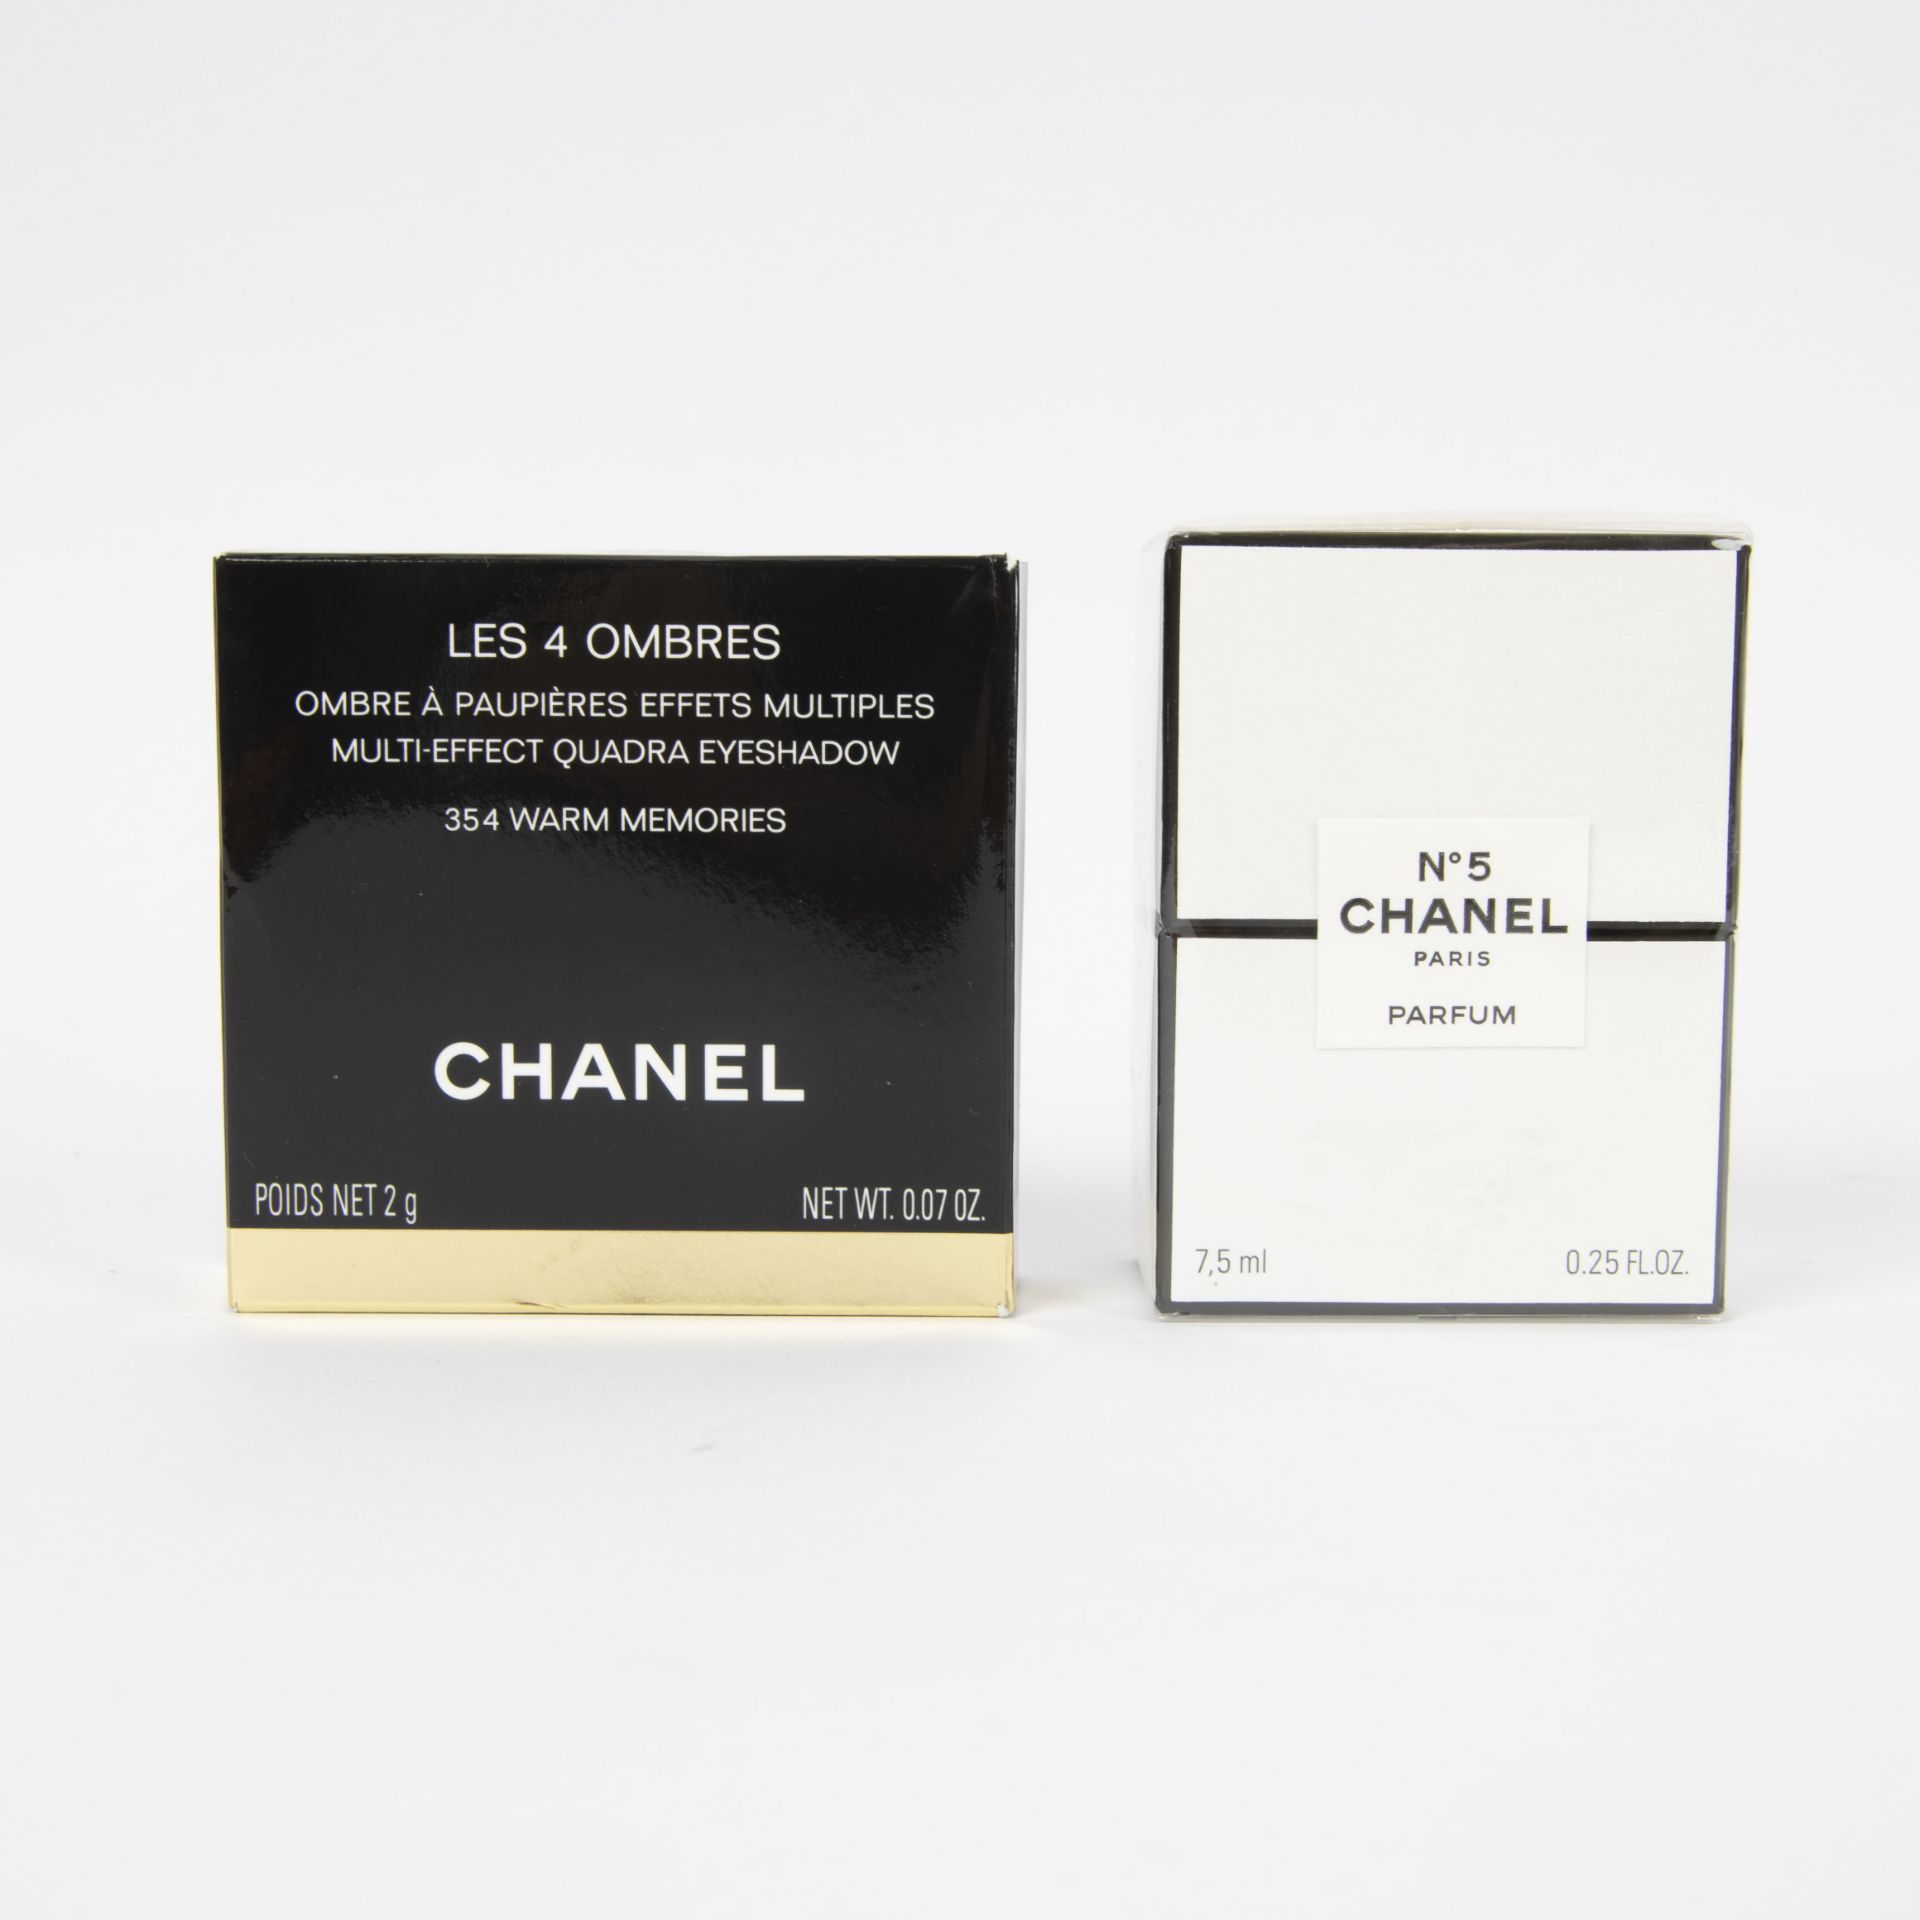 Les 4 ombres de Chanel and Chanel perfume n°5, 7.5 ml